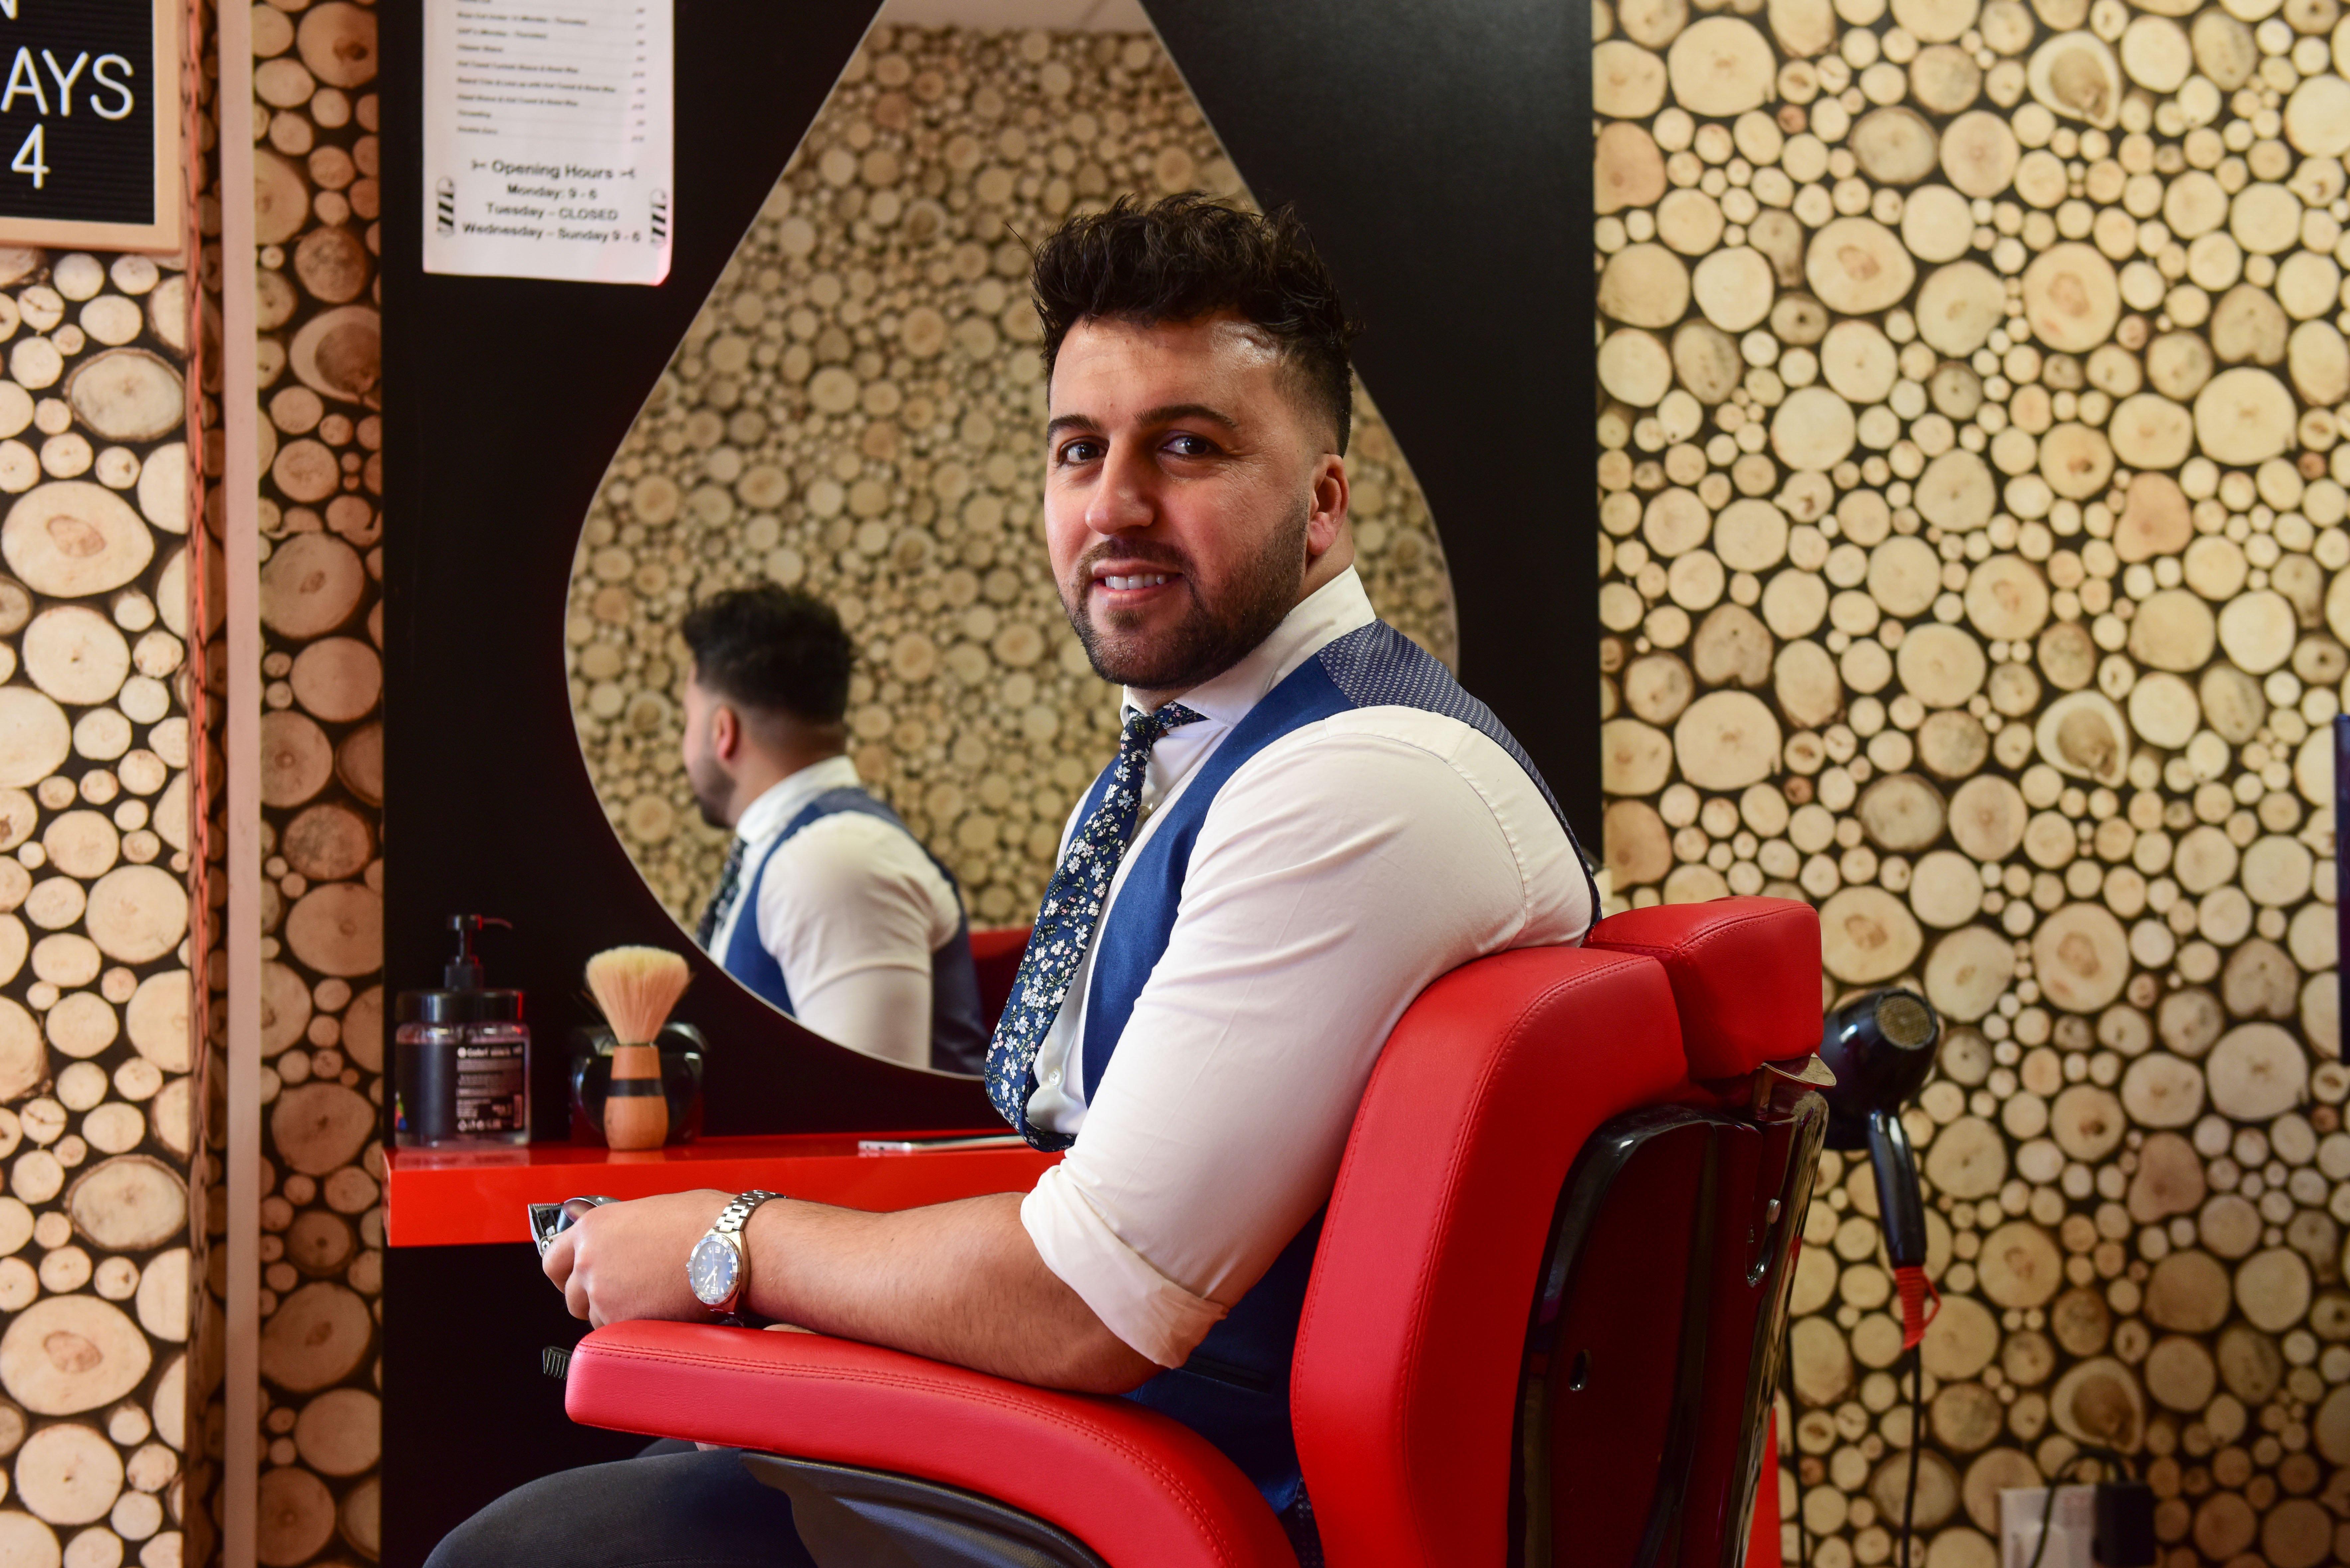 Hartlepool Barber Opens Doors To Offer Free Haircuts To